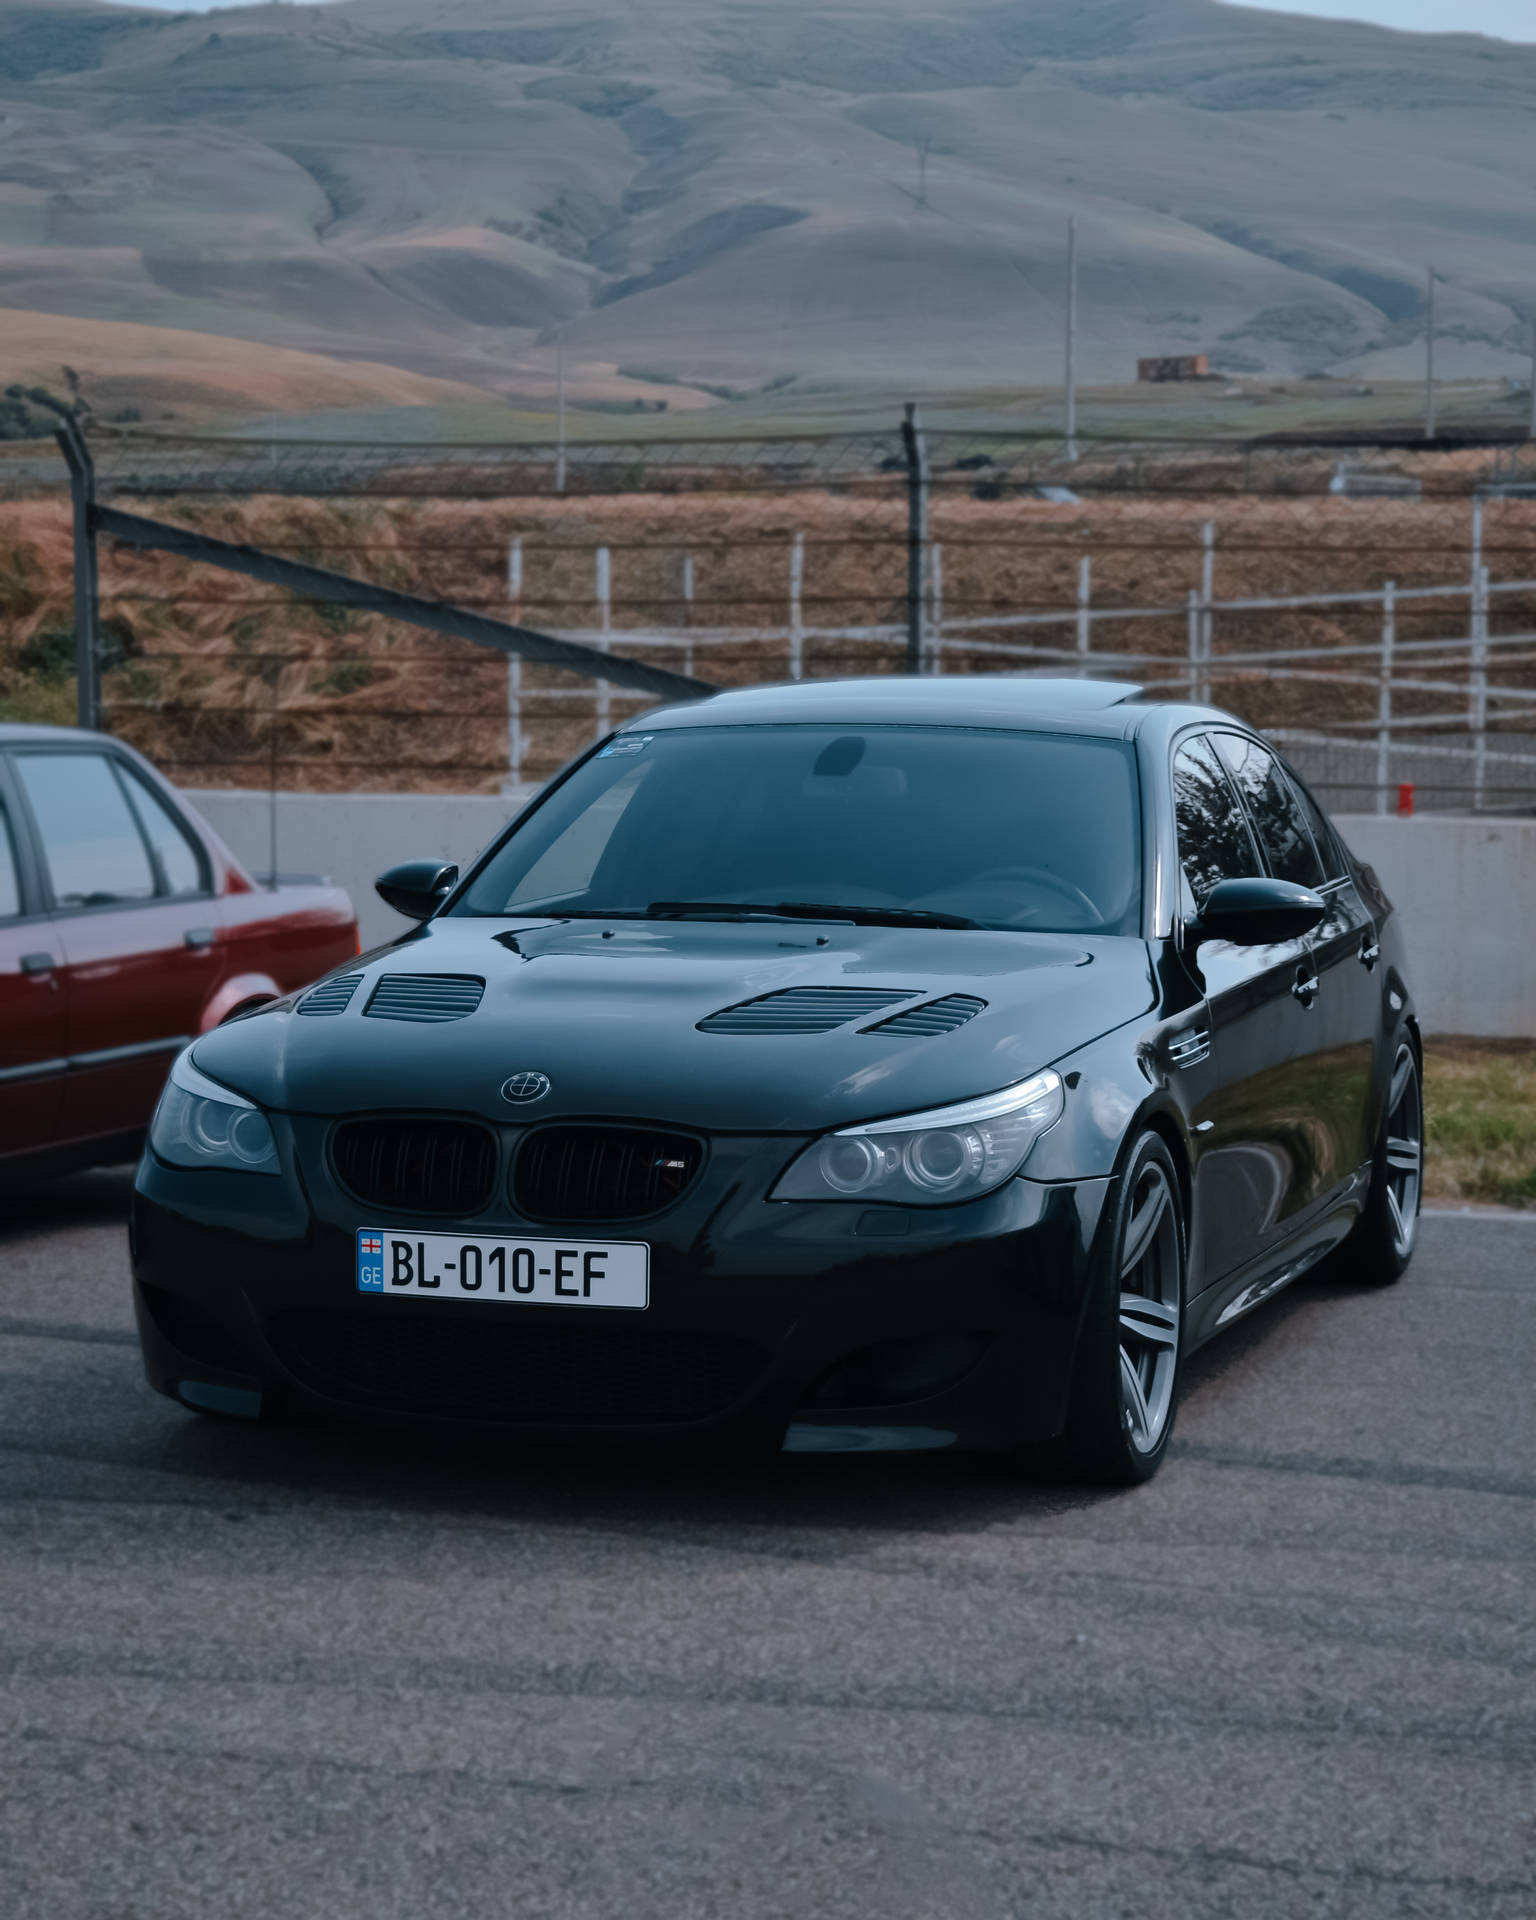 Black Bmw M5 At Racing Track Background